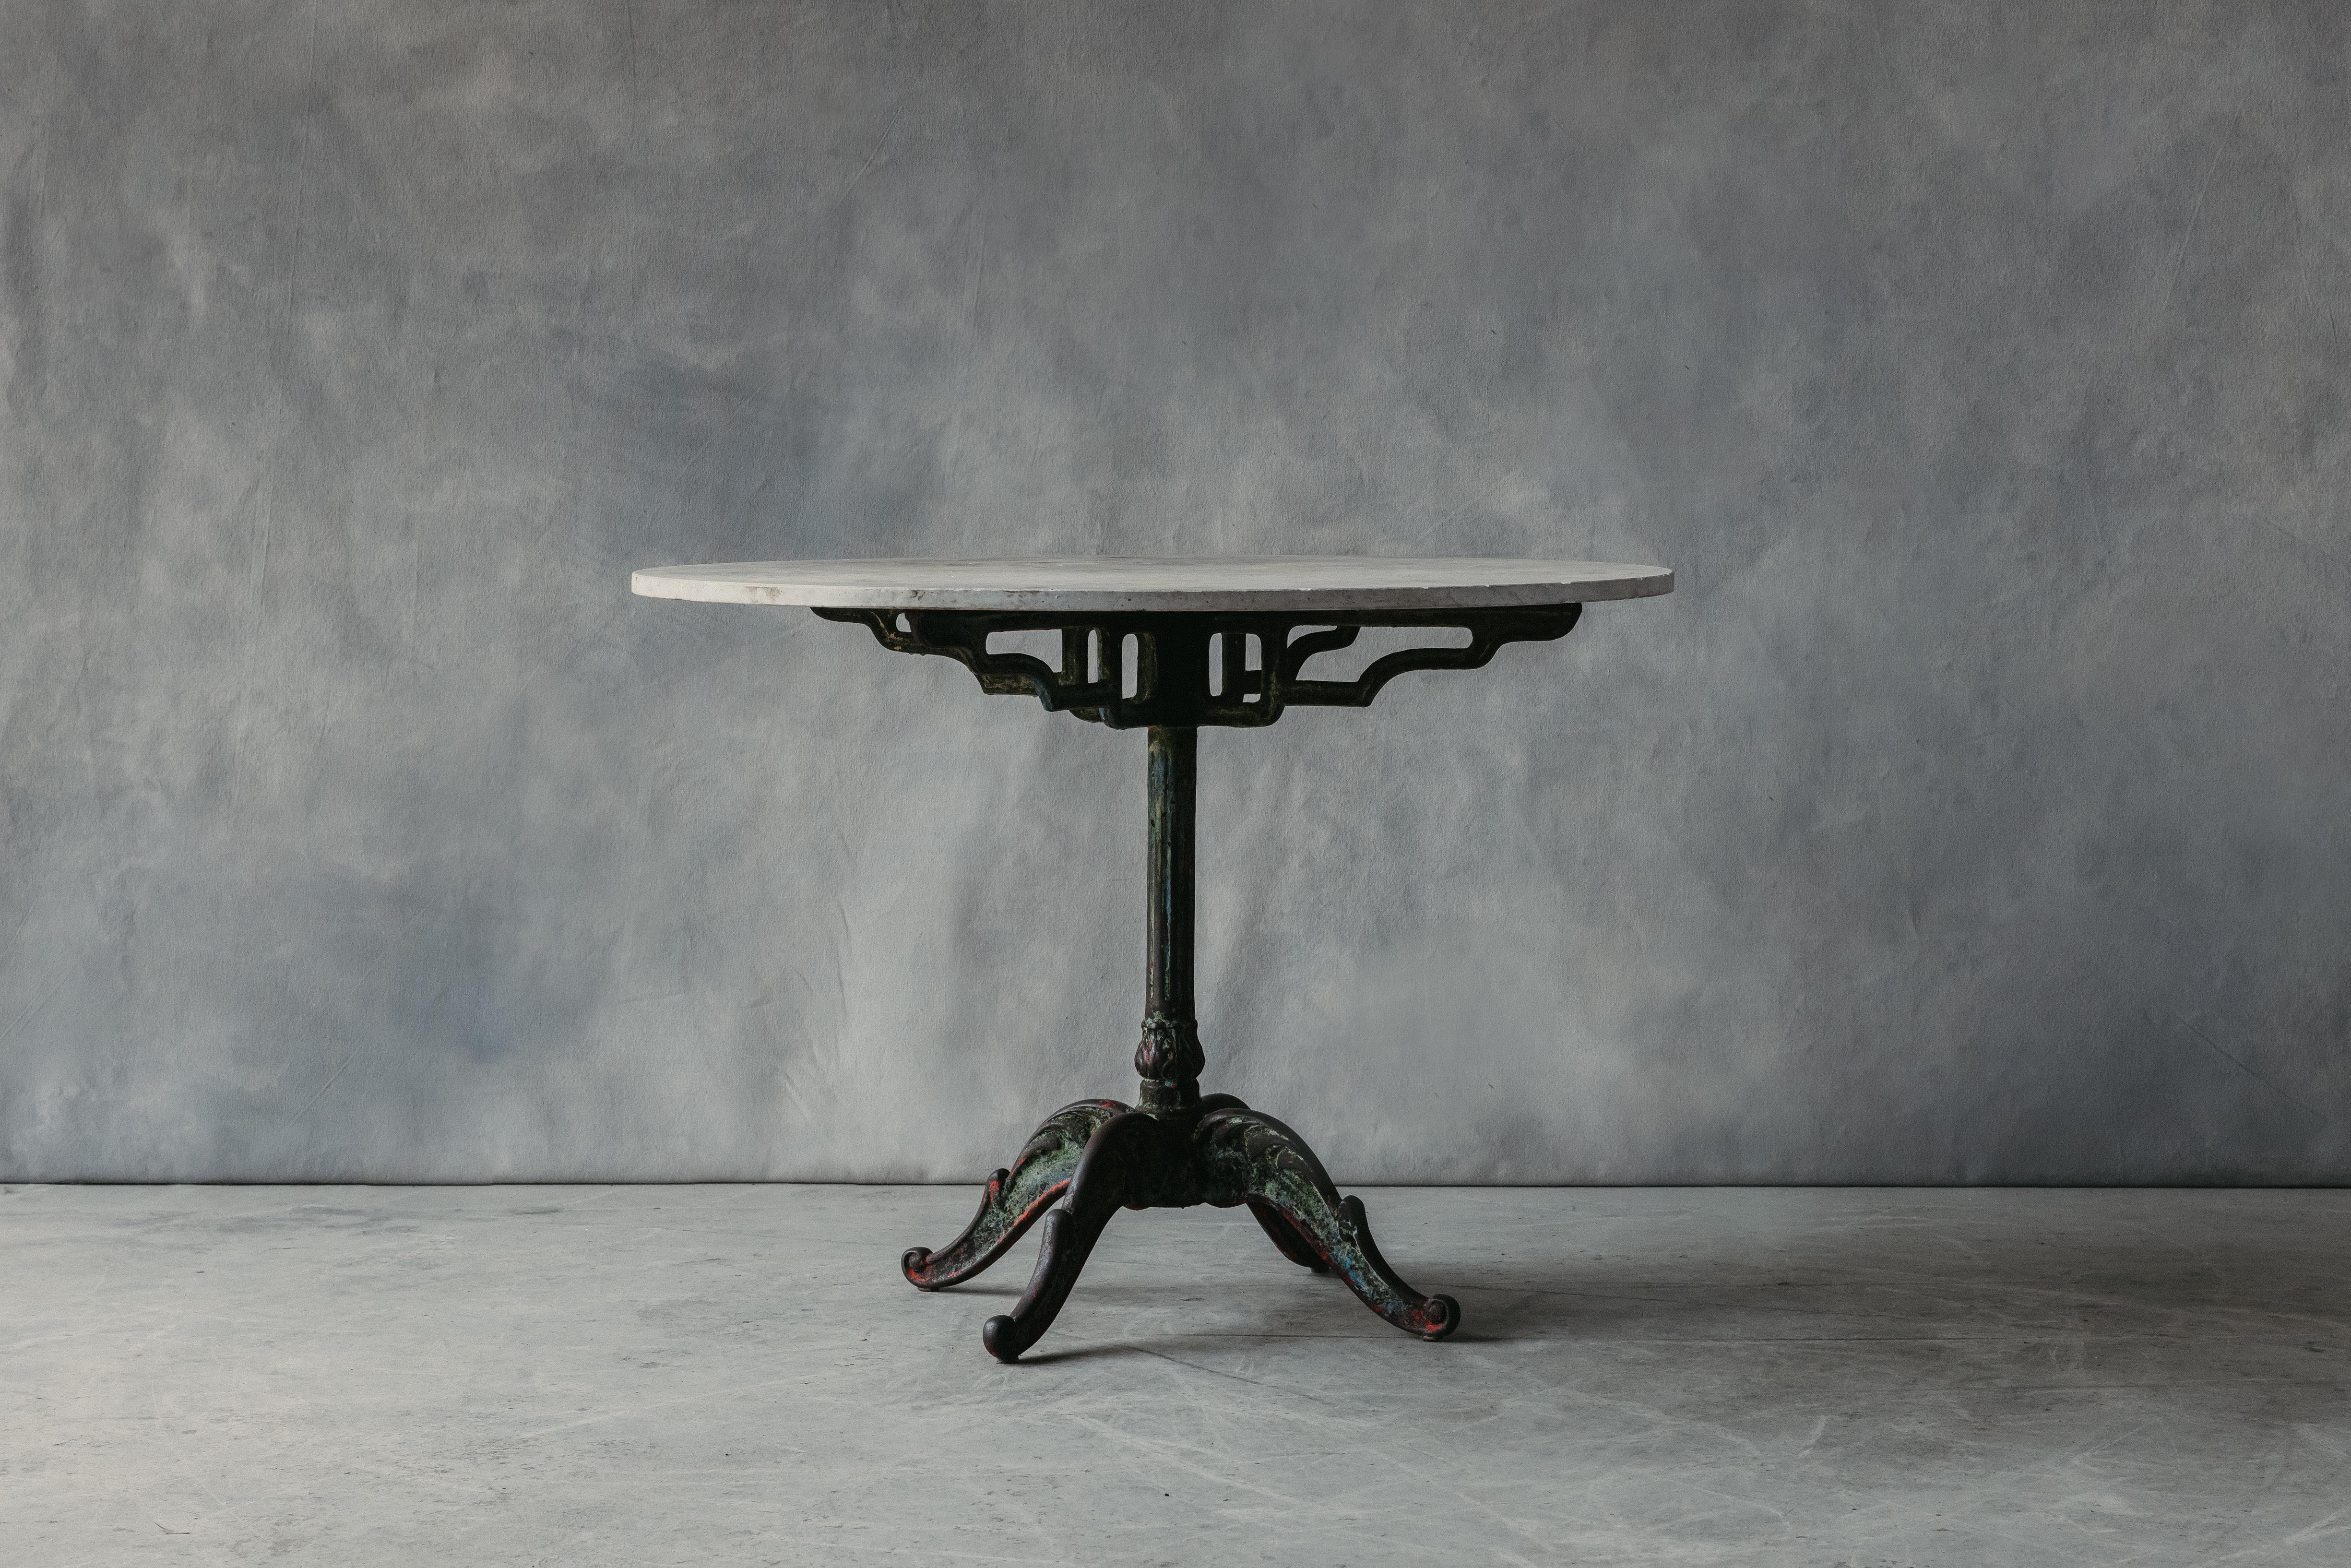 Vintage Cast Iron Garden Table From France, Circa 1940.  Solid cast Iron base with fantastic original color and patina.  Marble top in good condition with age related use and wear.